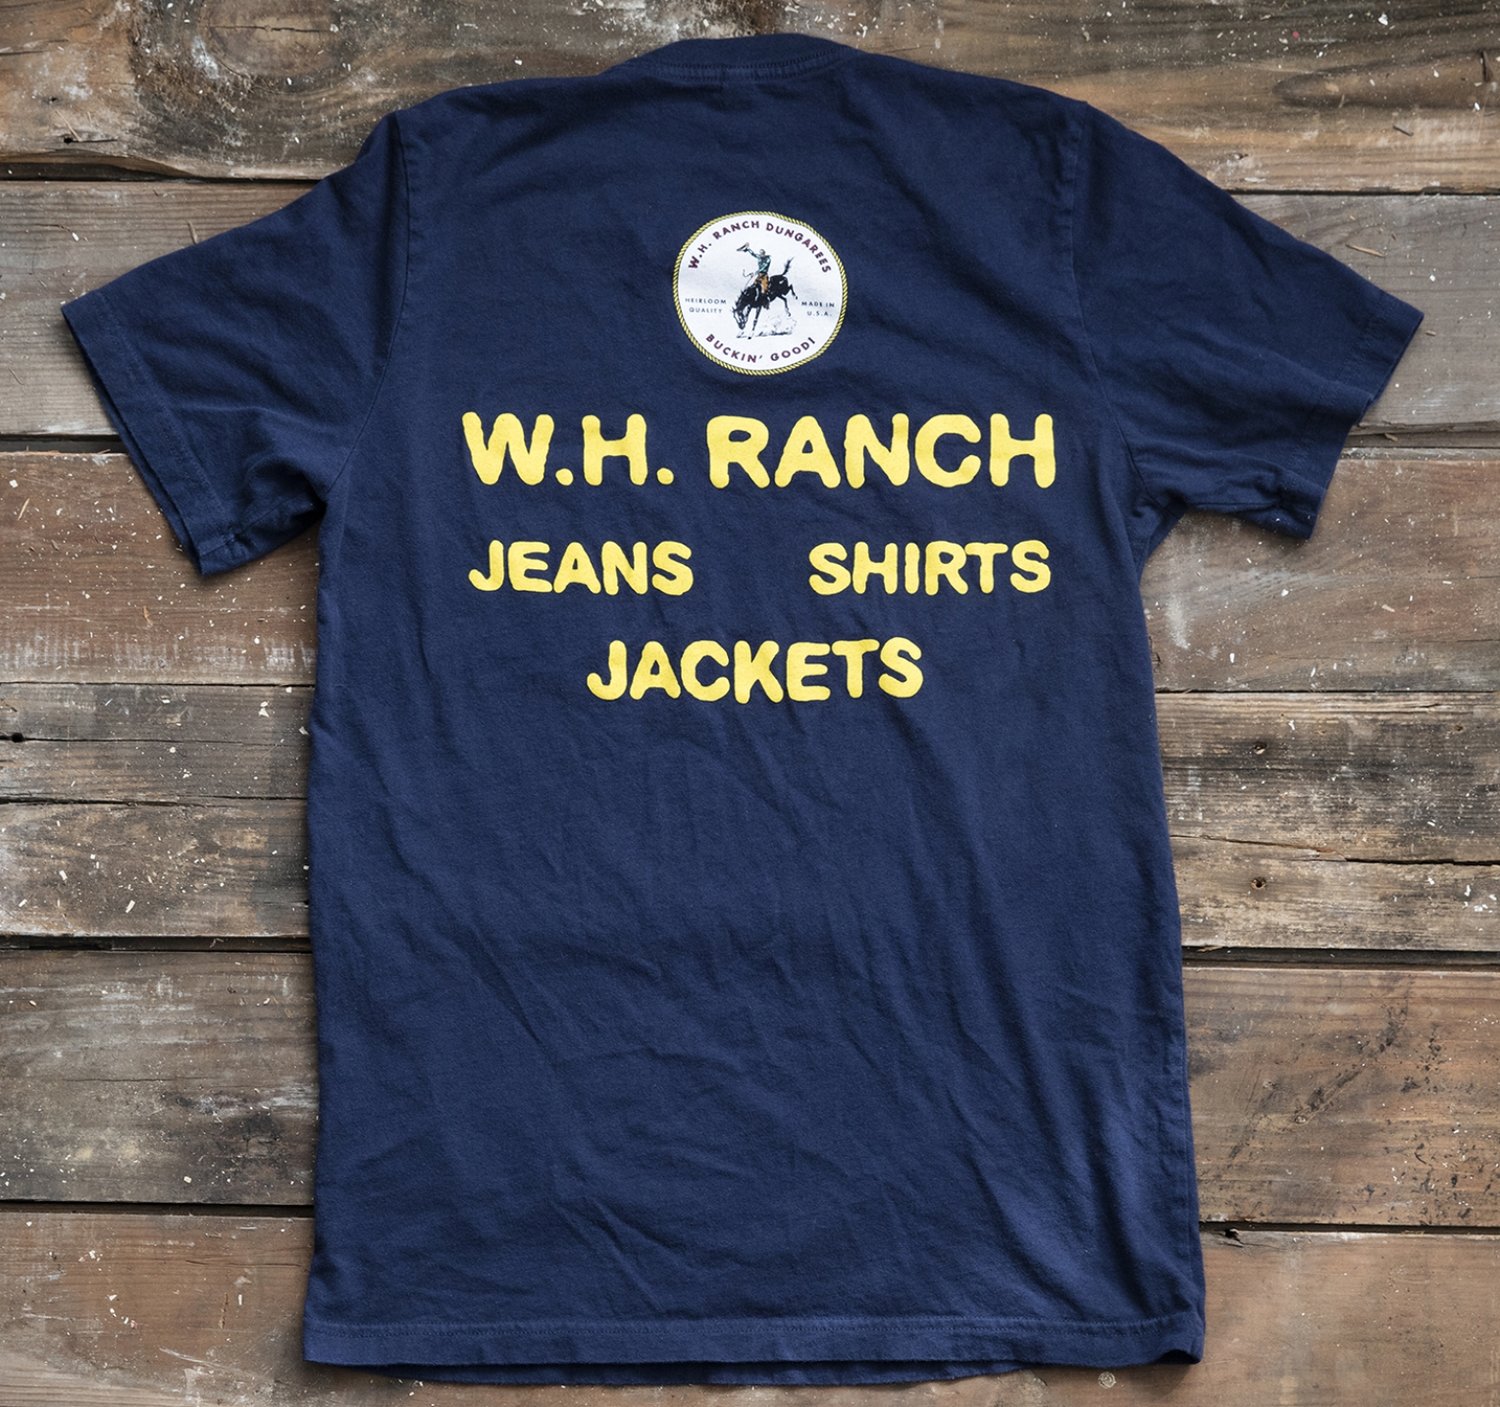 W.H. Ranch Champion Tees — W.H. Ranch Dungarees